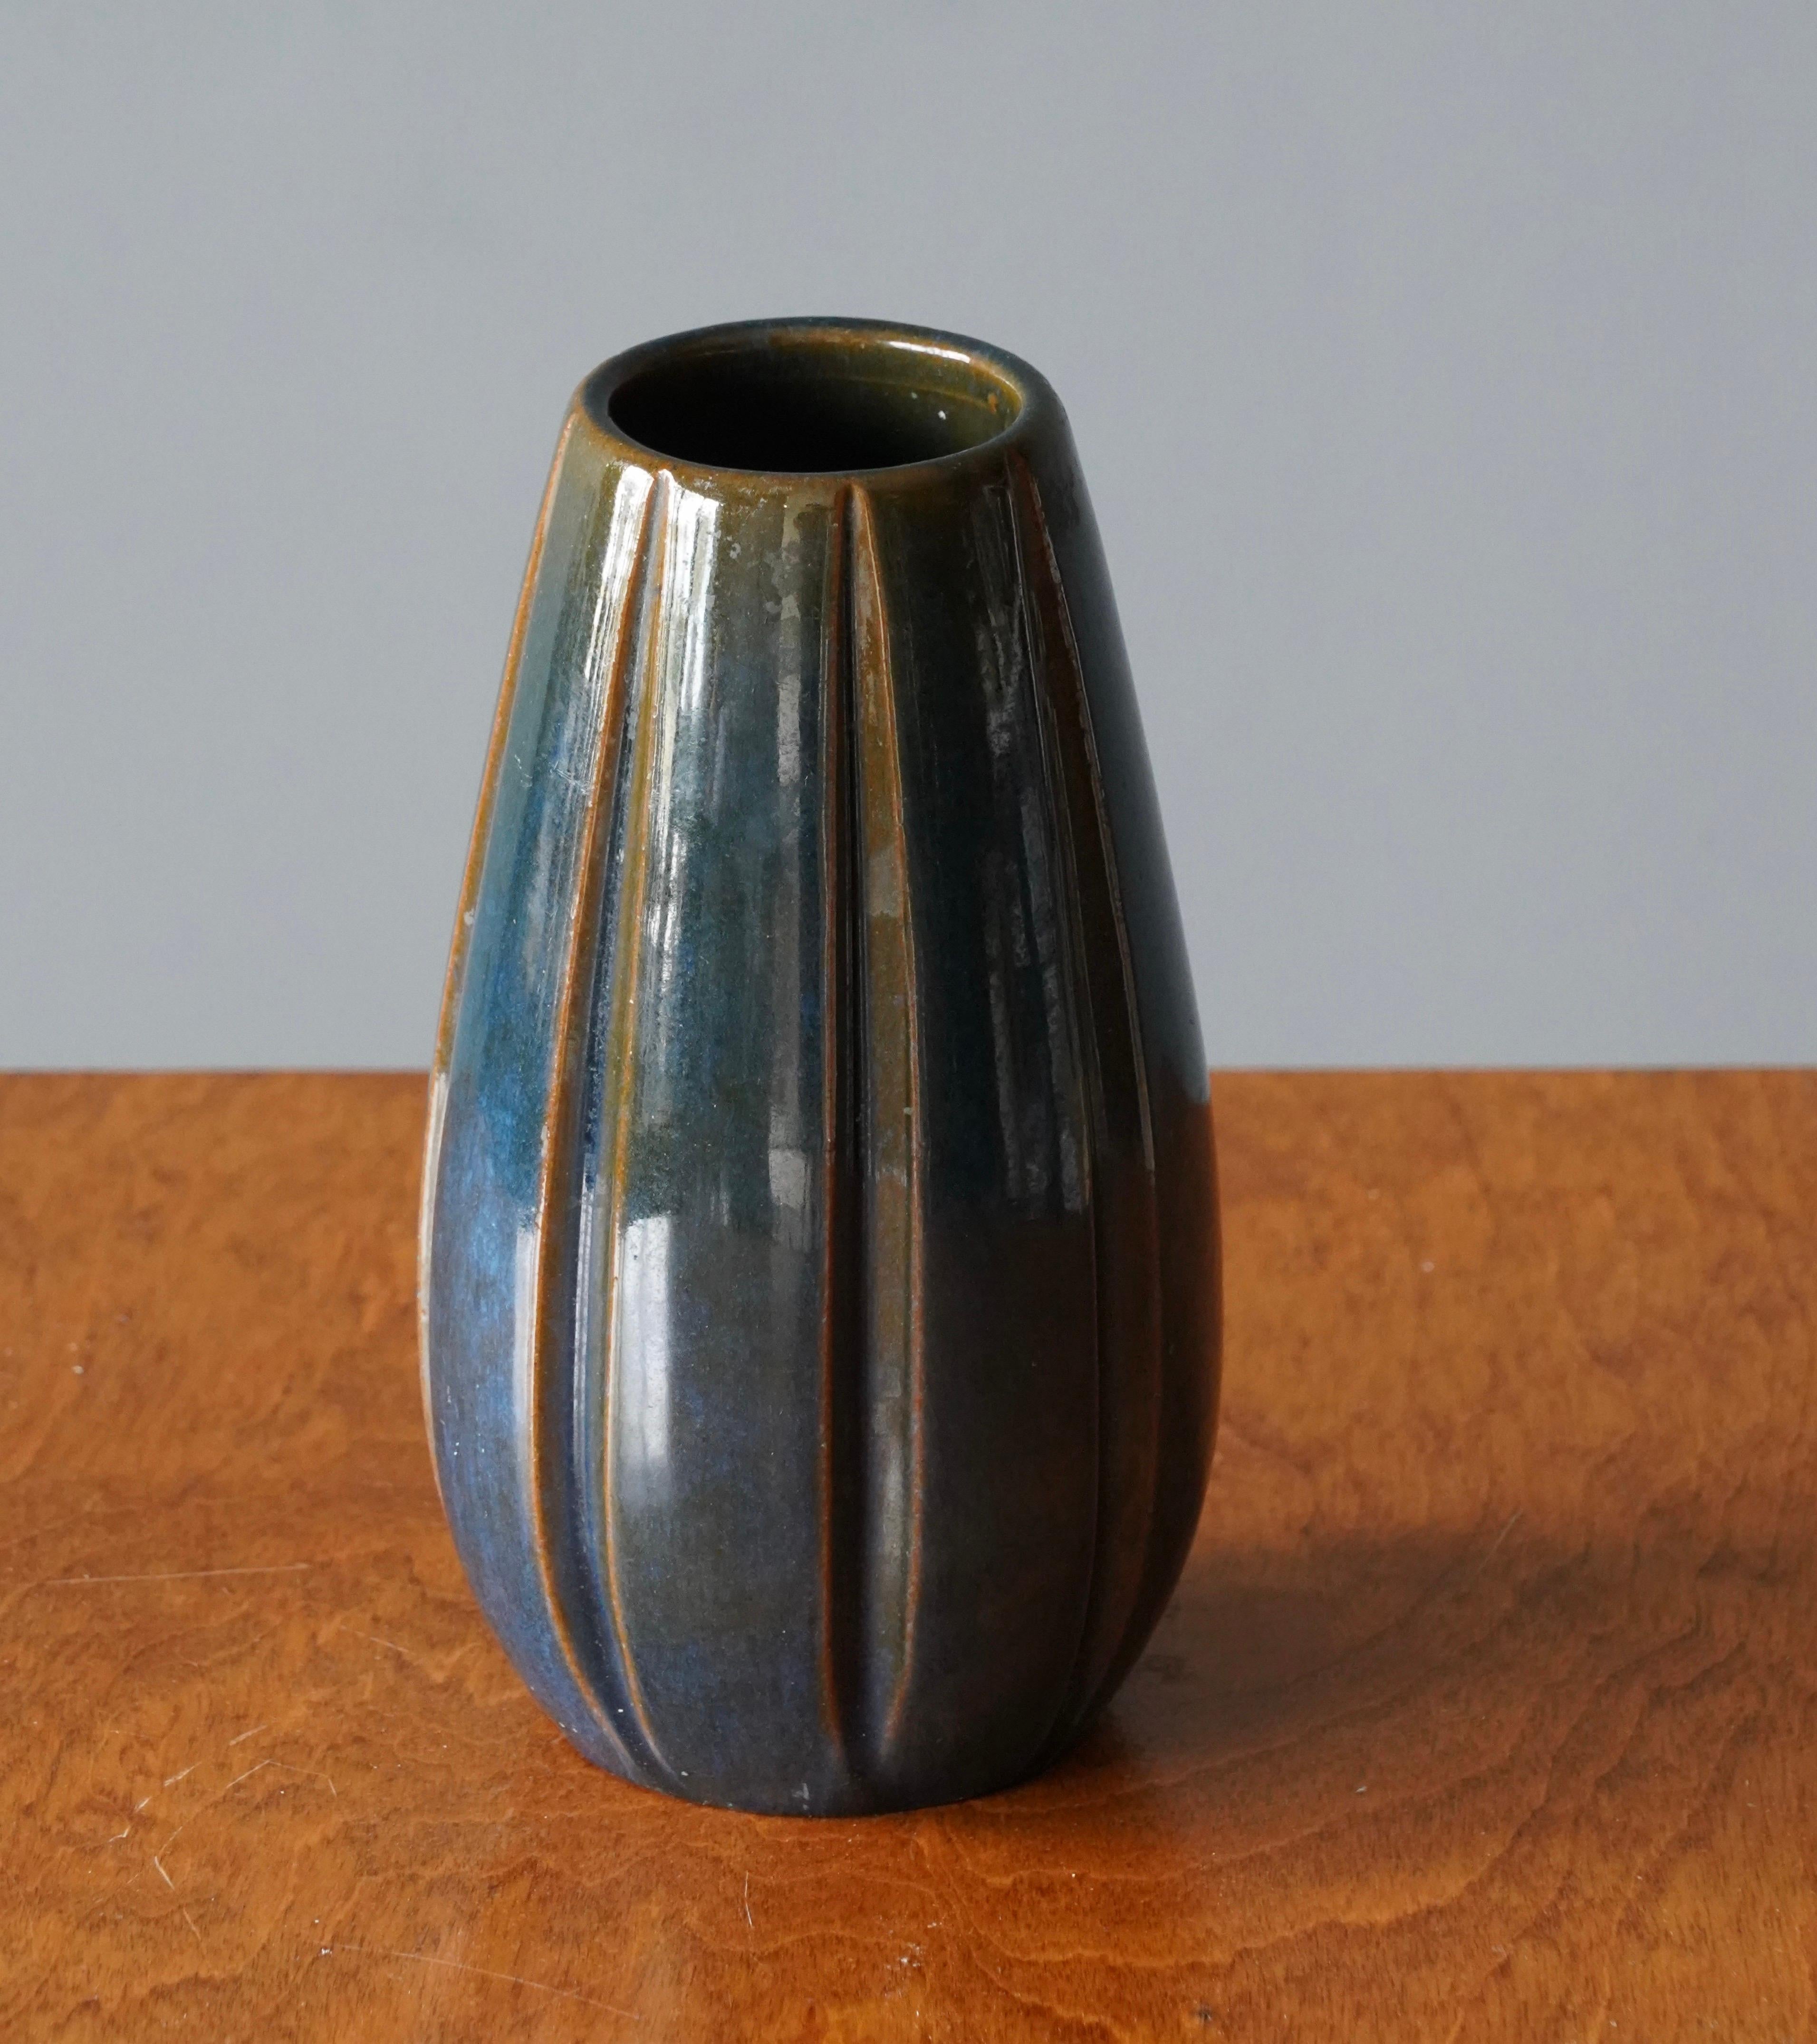 An early modernist vase. Designed by Vicke Lindstrand, for Upsala-Ekeby, Sweden, 1940s. Stamped.

Other designers of the period include Ettore Sottsass, Carl Harry Stålhane, Lisa Larsson, Axel Salto, and Arne Bang.